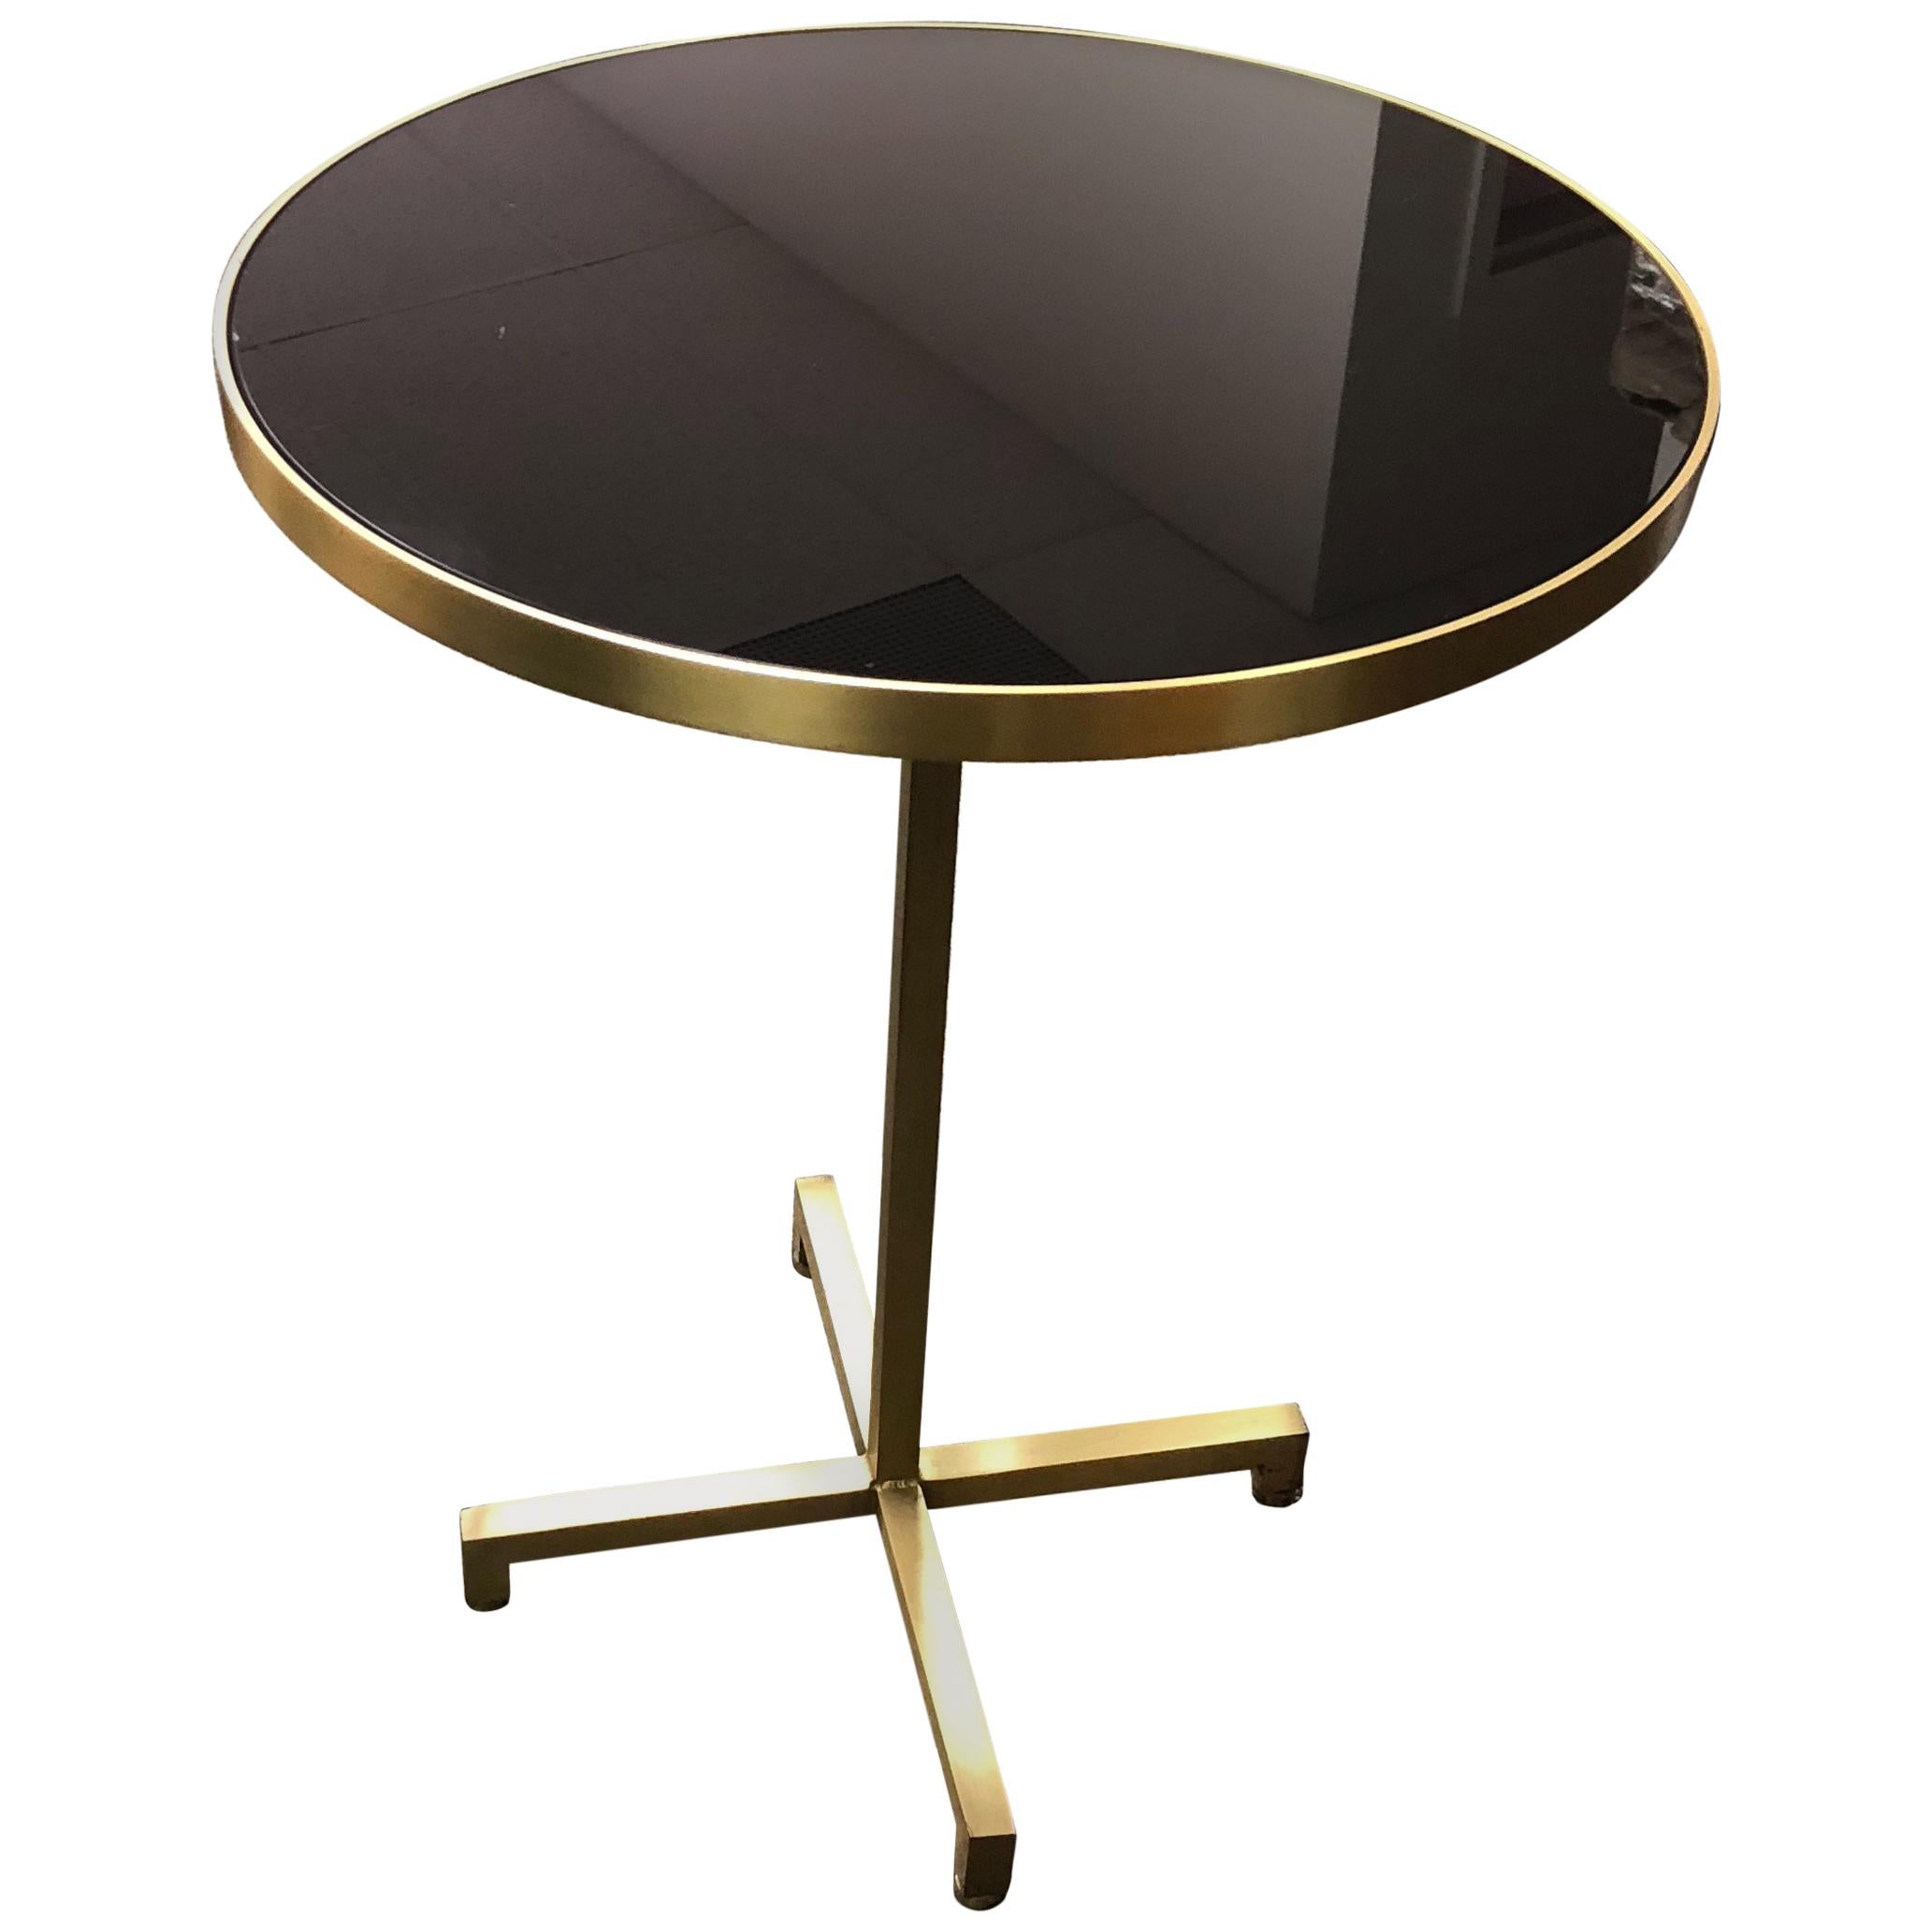 Re: 205 Brass Side Table with Black Mirror Glass